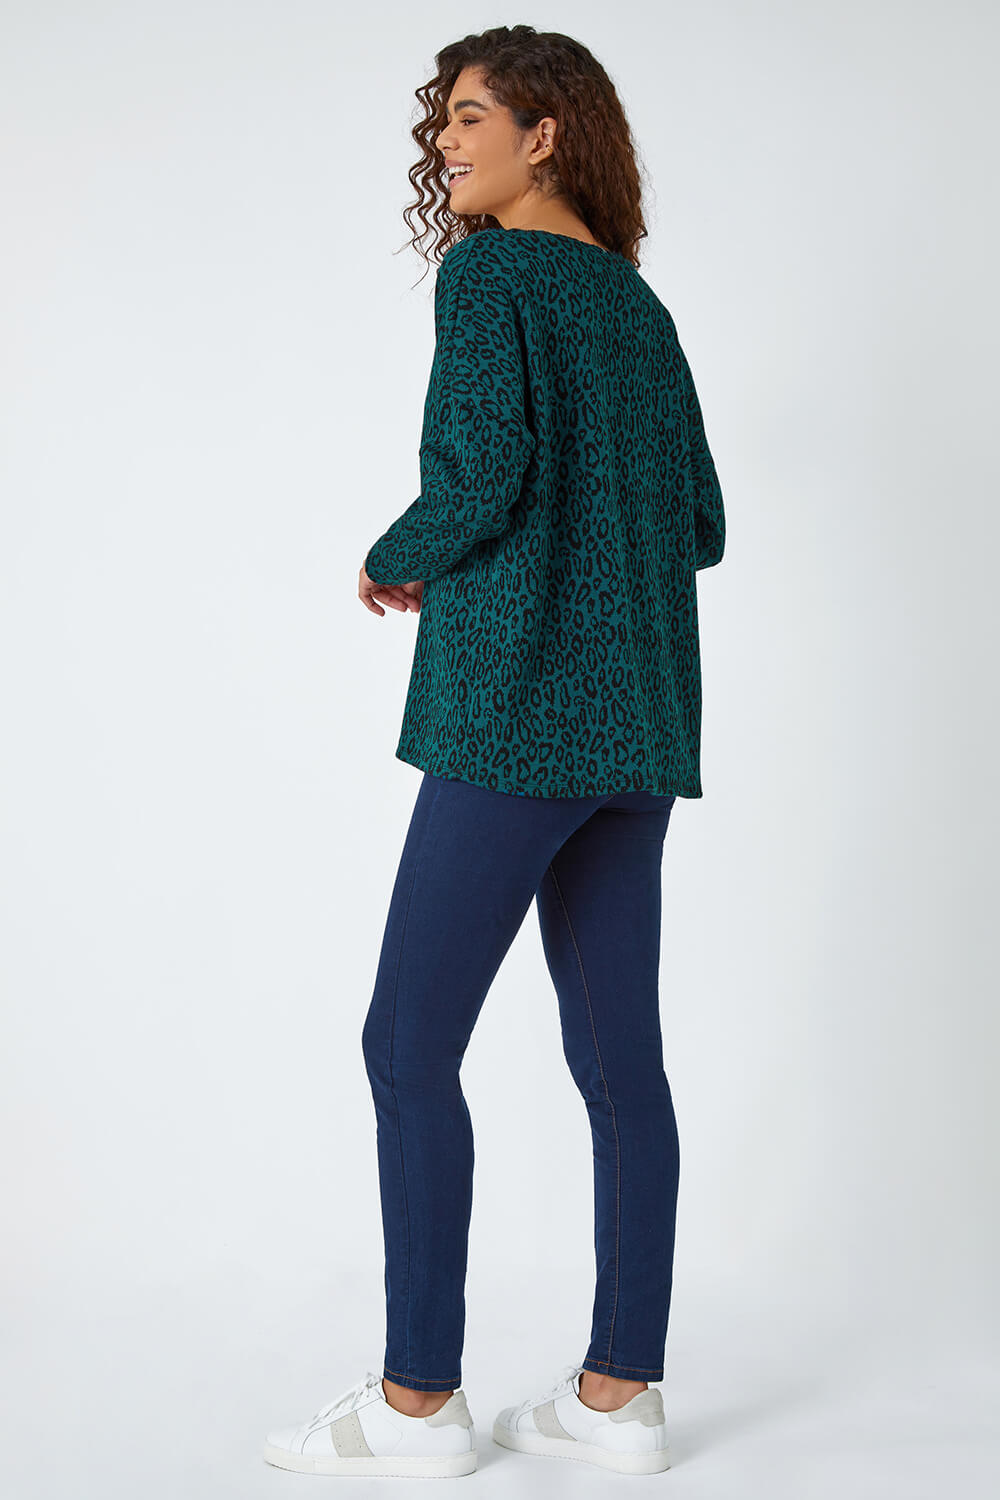 Teal Animal Print Tunic Stretch Top, Image 3 of 5